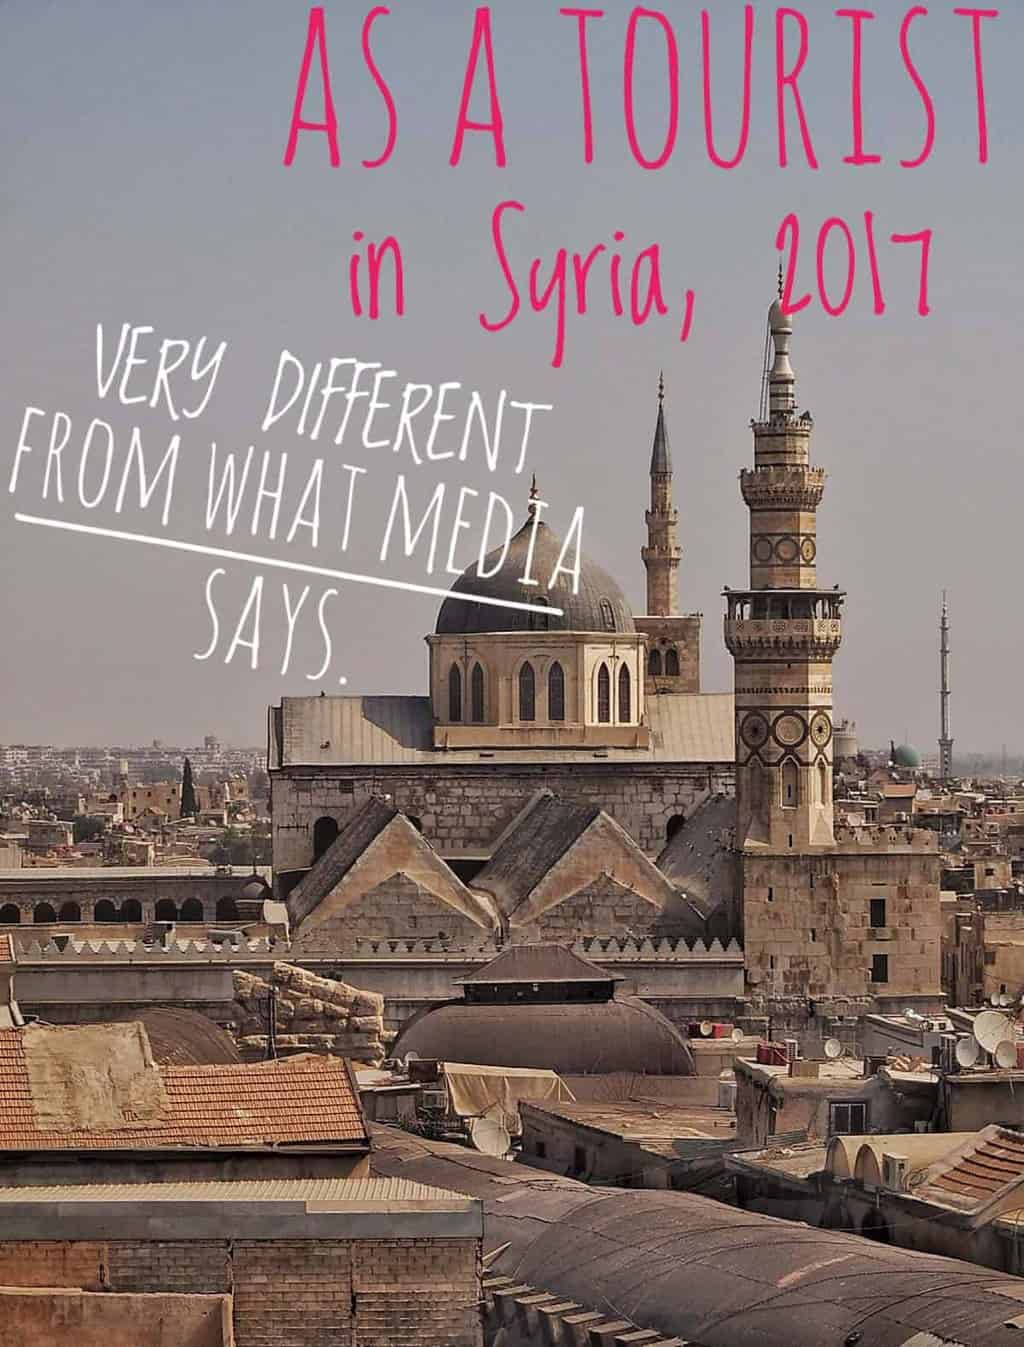 Travel report from Damascus the capital of Syria from 2017